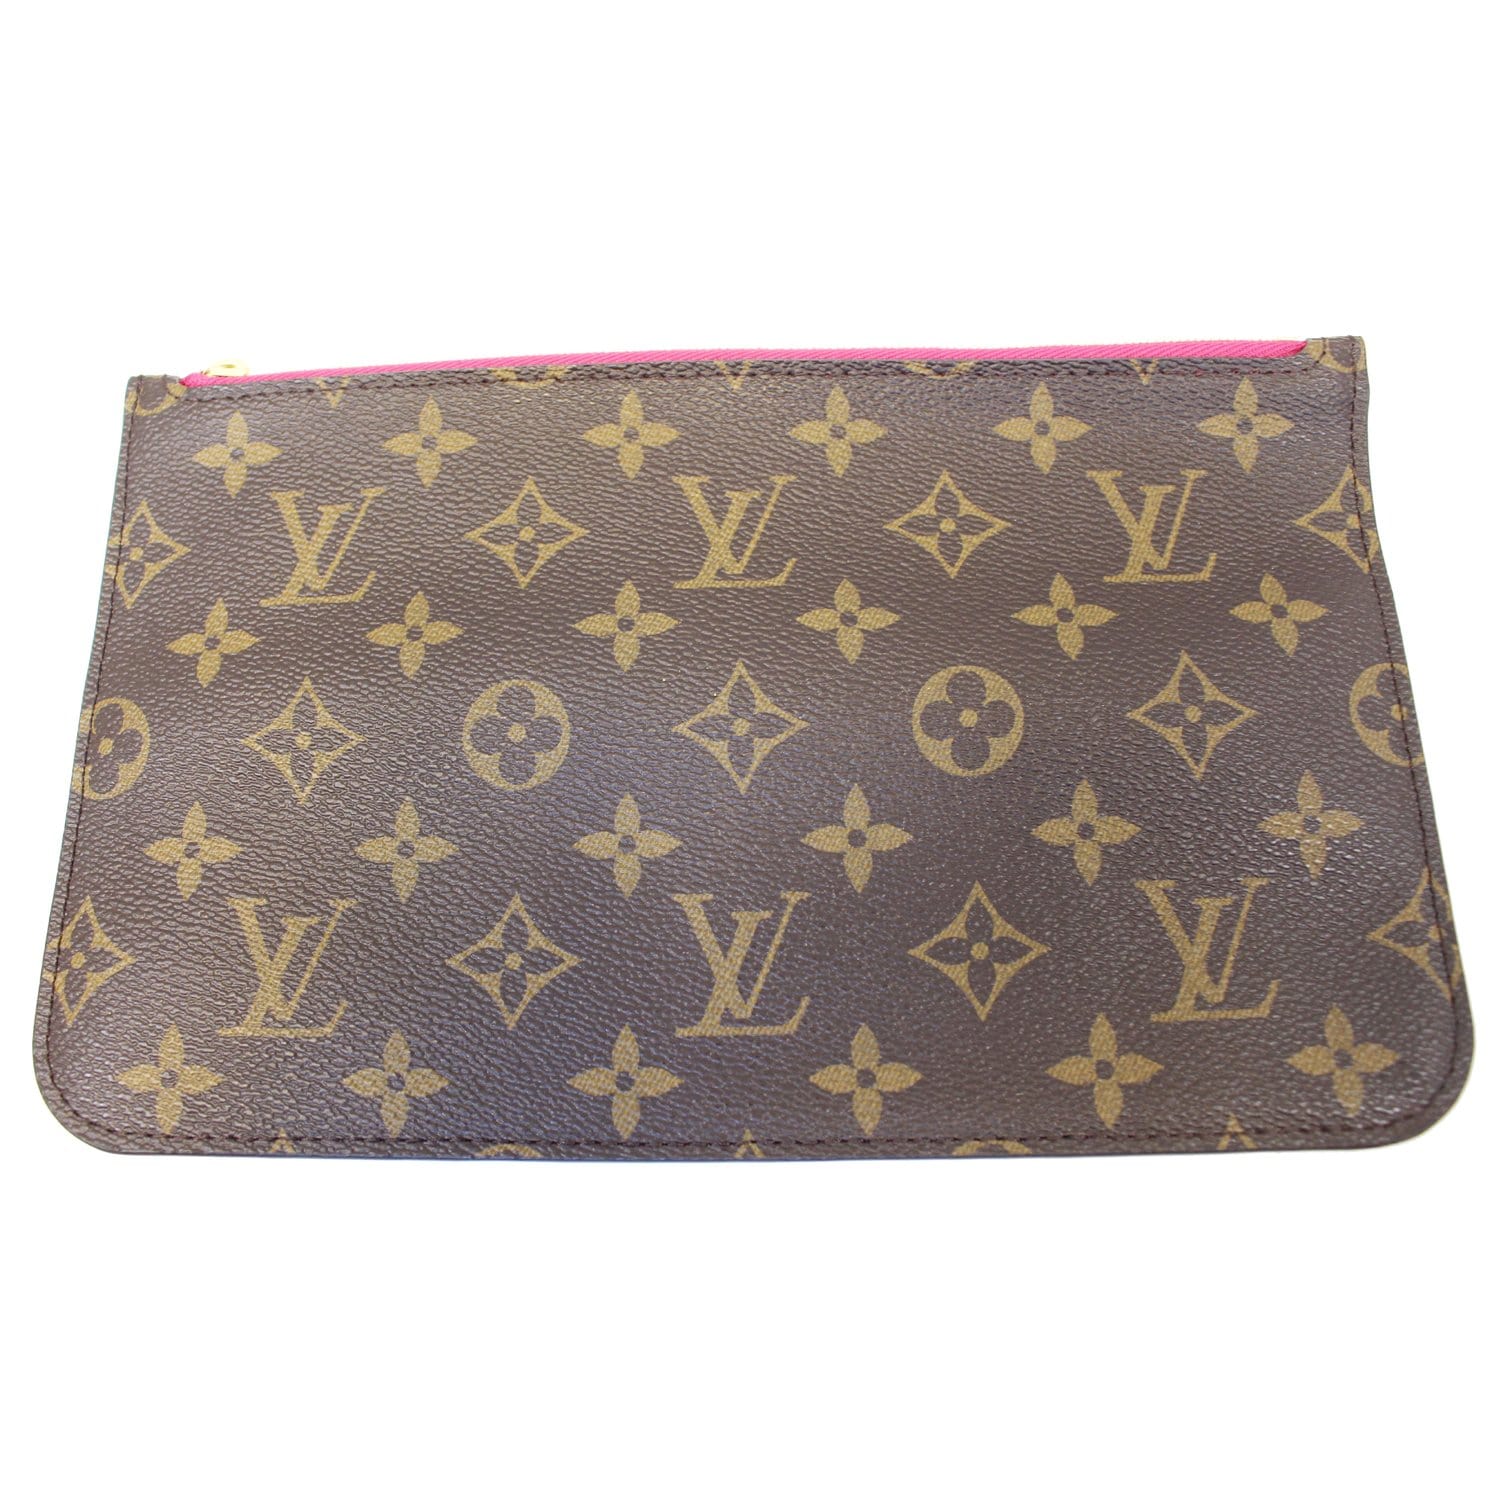 Luxury Handbags LOUIS VUITTON Neverfull Wristlet Pochette From The Damier  Azur Collection 810-00406 - Mazzarese Jewelry